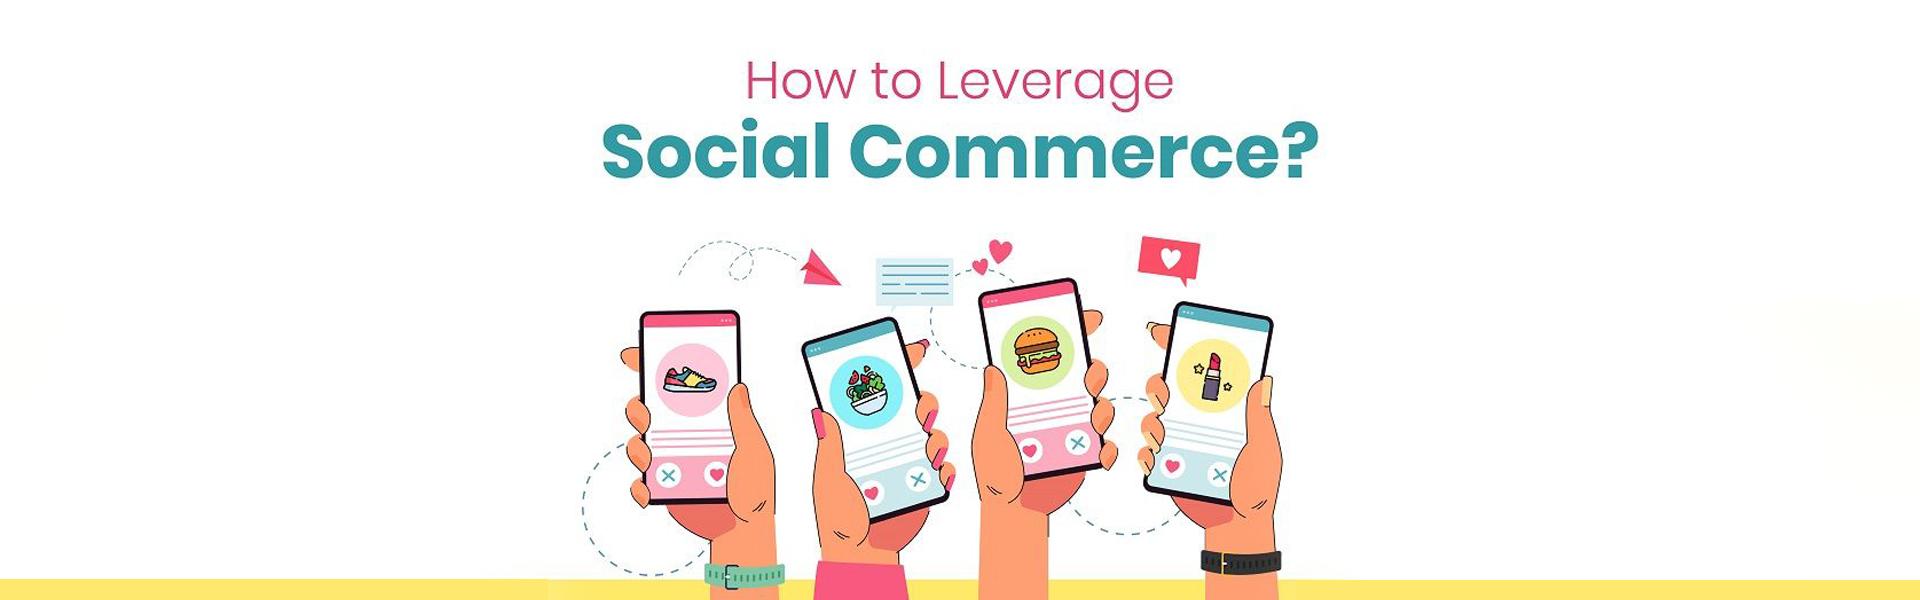 How to Leverage Social Commerce?